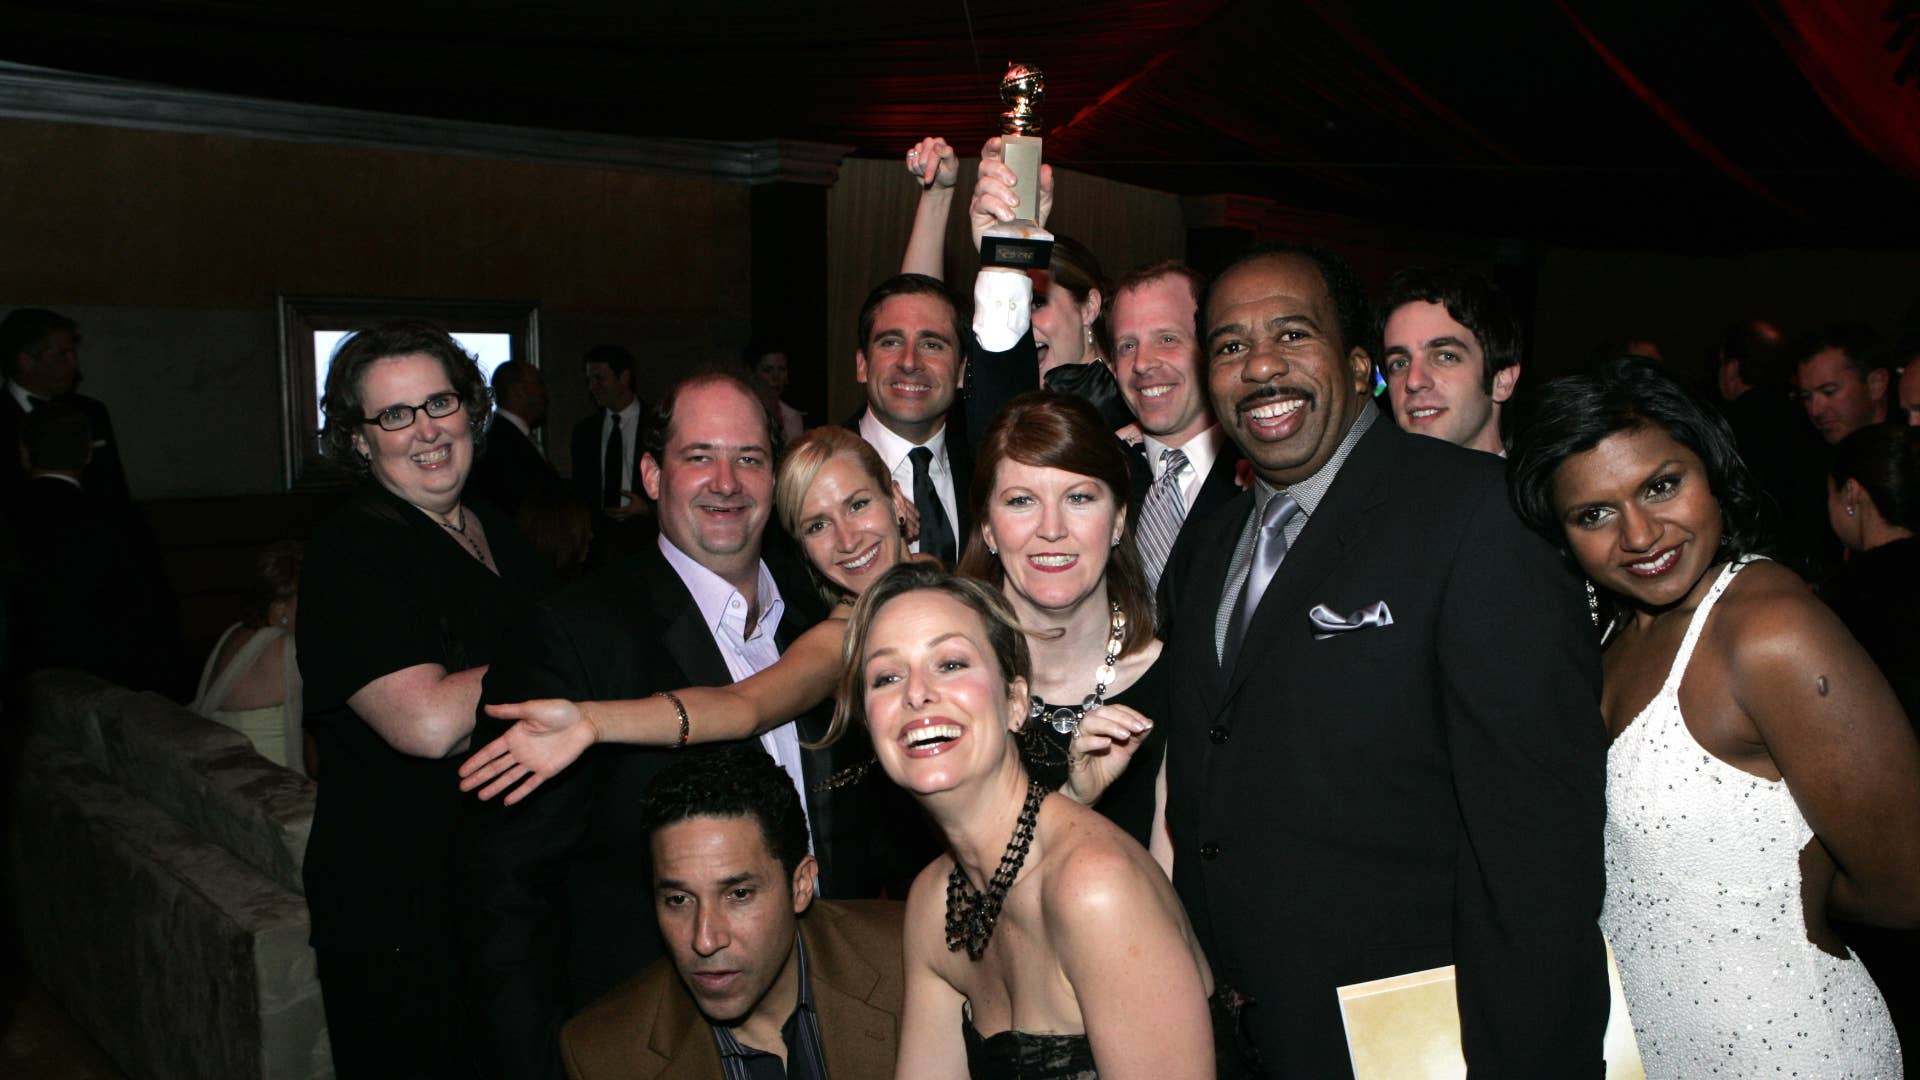 The cast of 'The Office' during 2006 Golden Globes After Party.